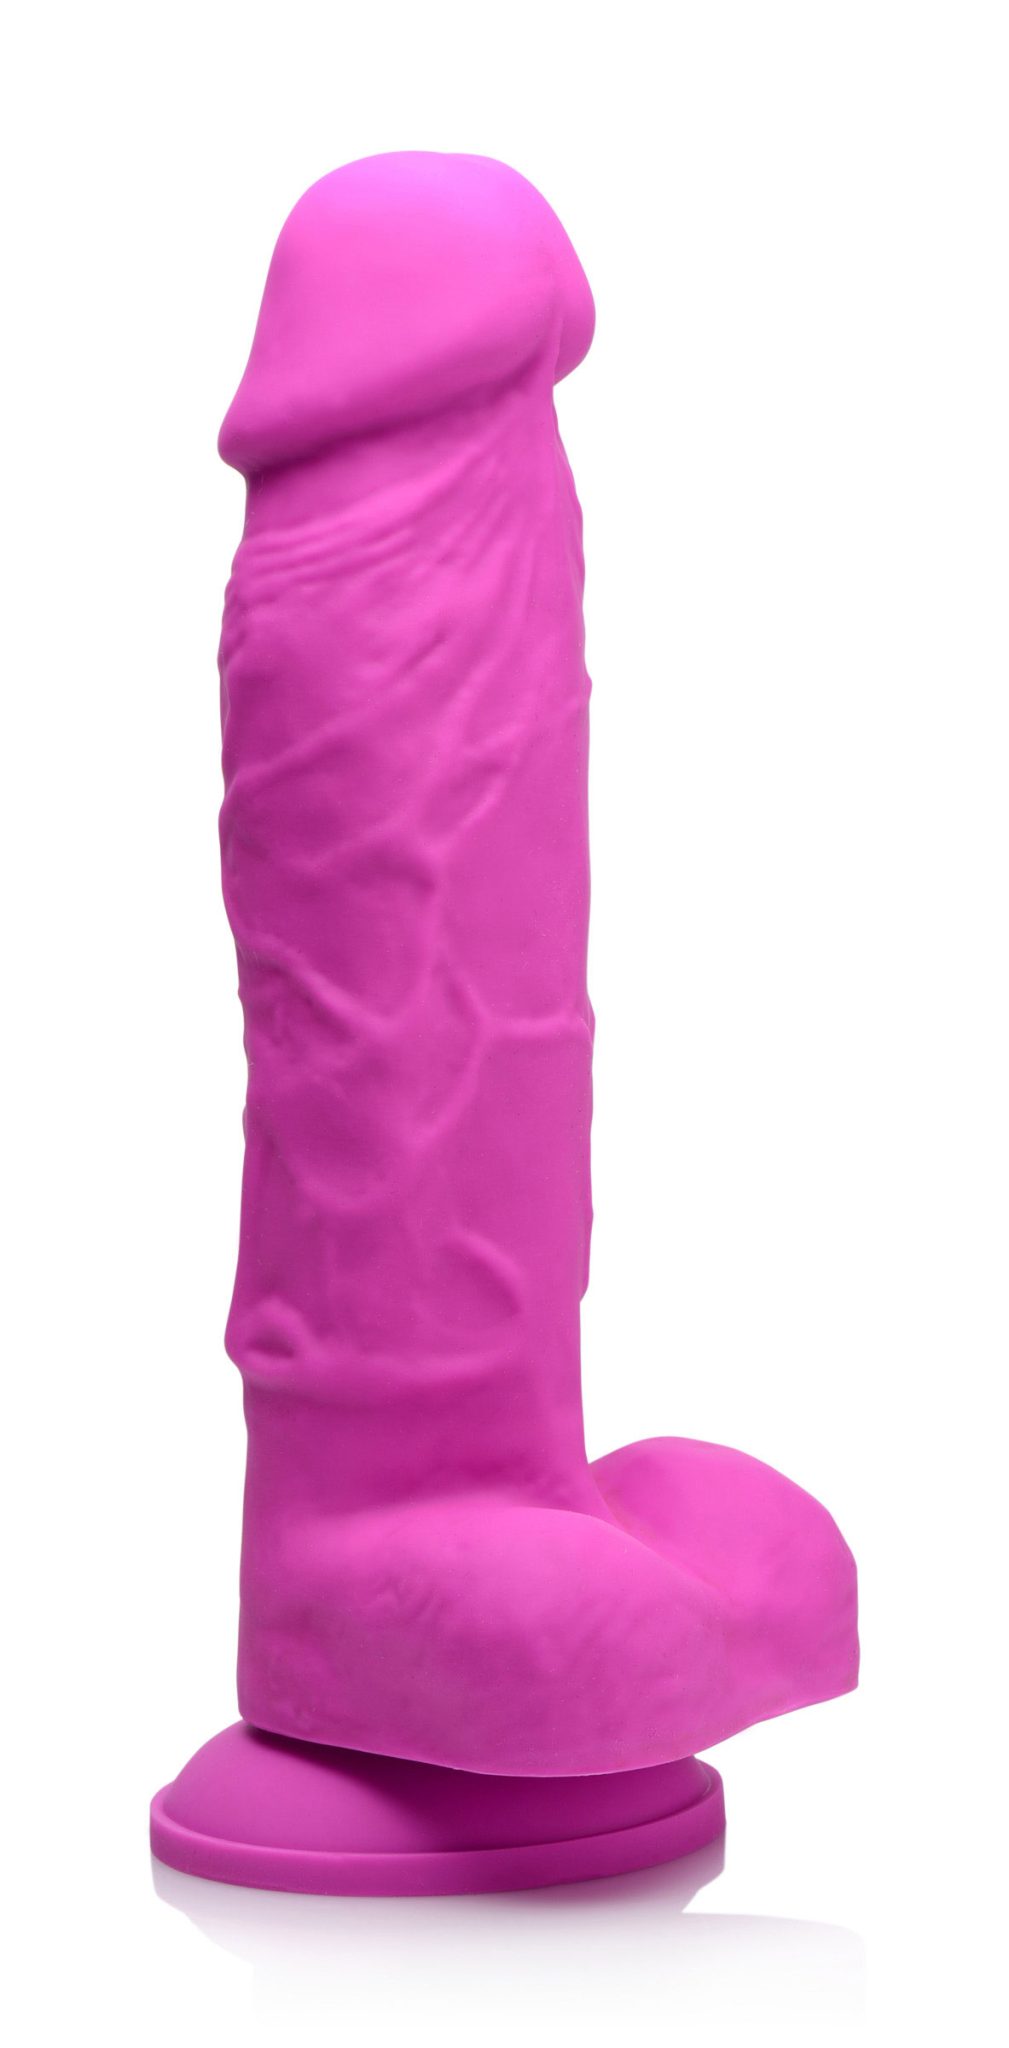 Power Pecker 7 Inch Silicone Dildo with Balls – Pink